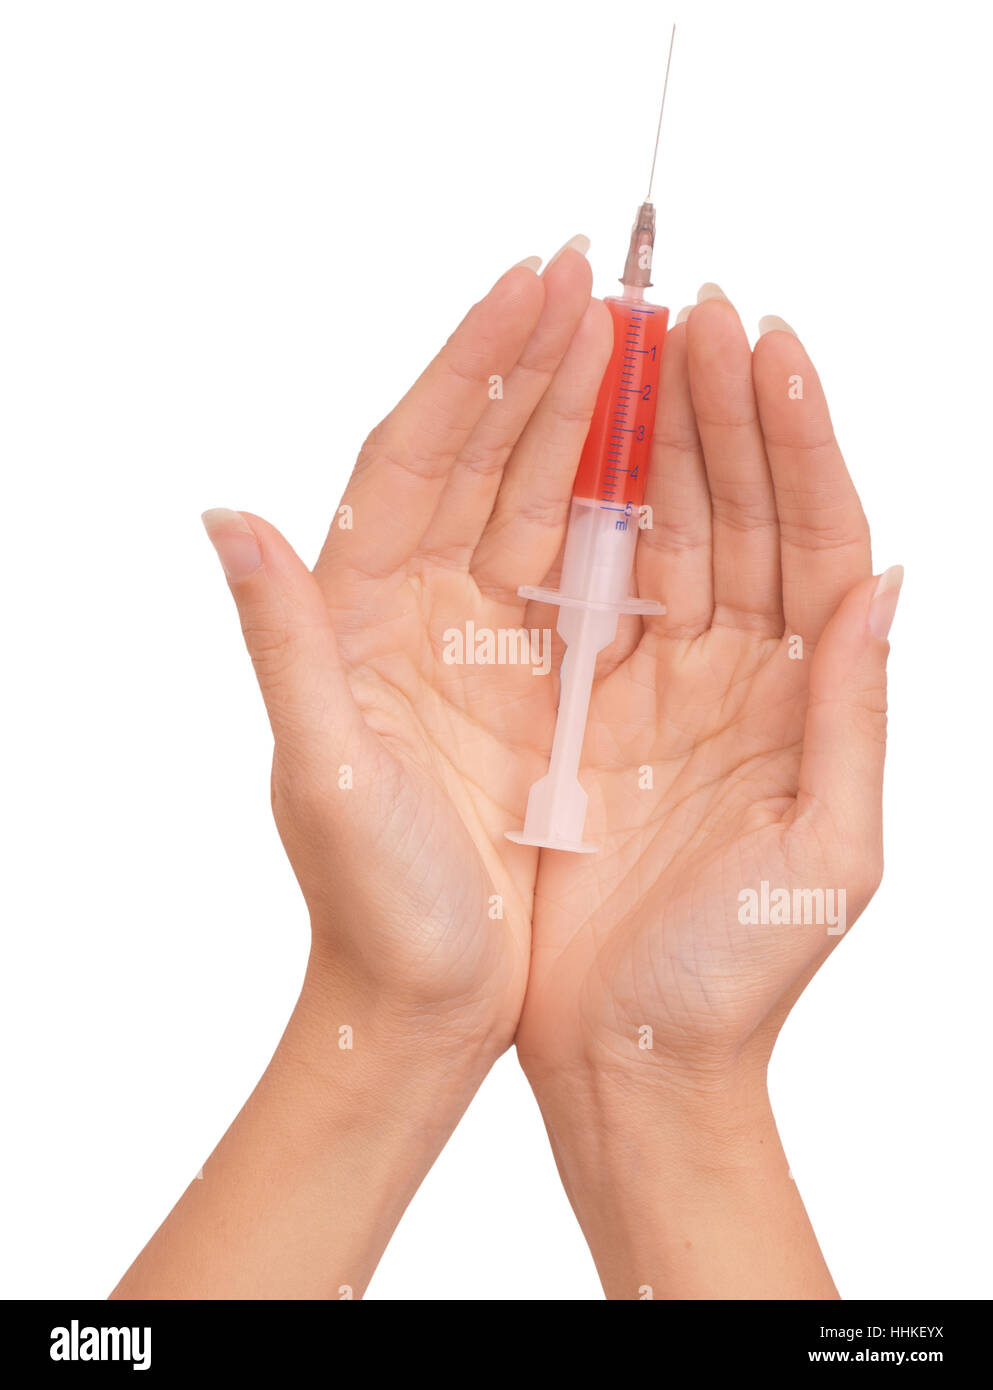 material, drug, anaesthetic, addictive drug, medicament, means, agent, Stock Photo